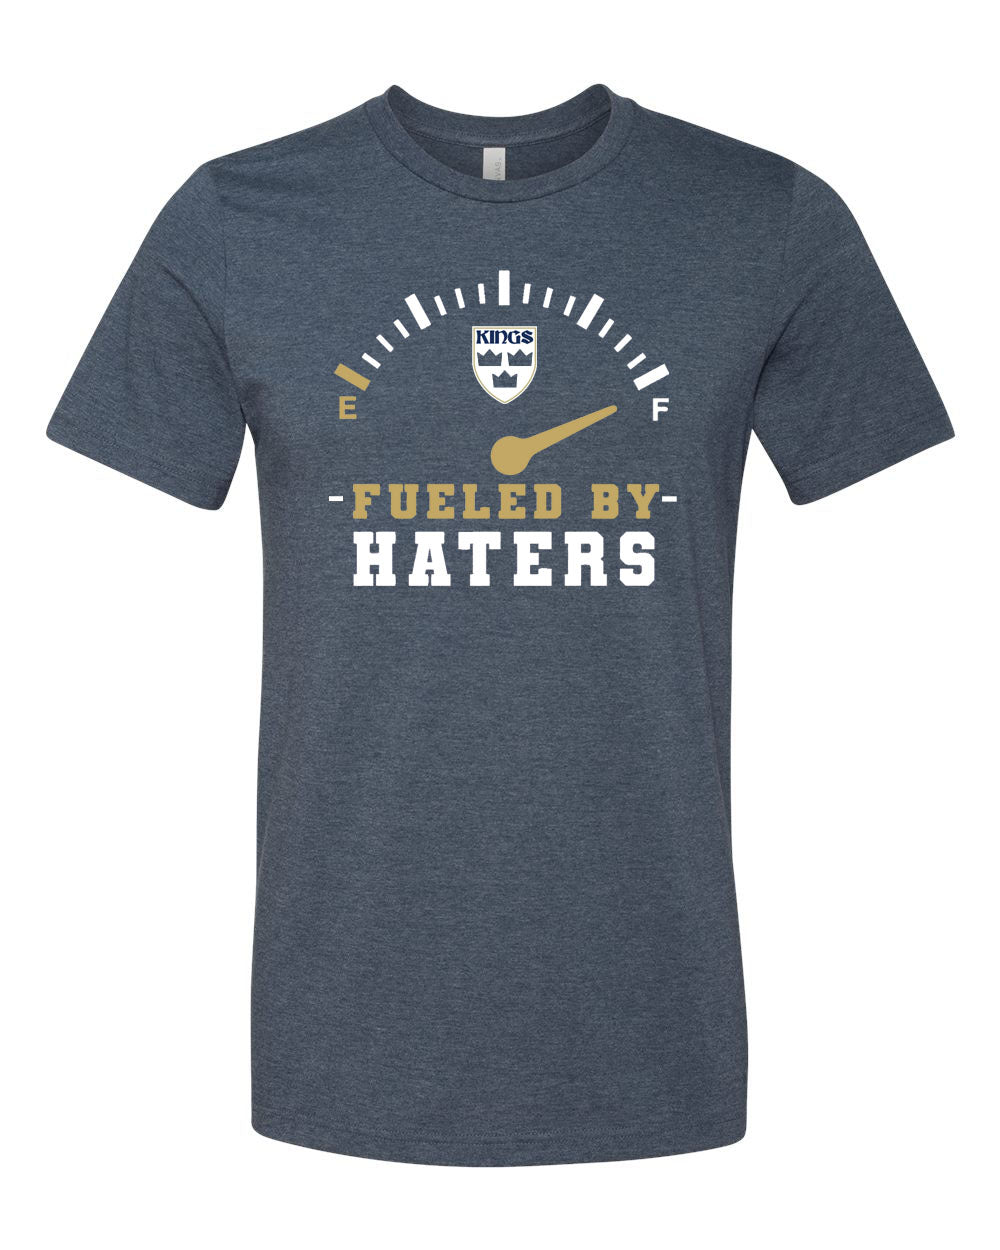 Fueled by Haters T-Shirt